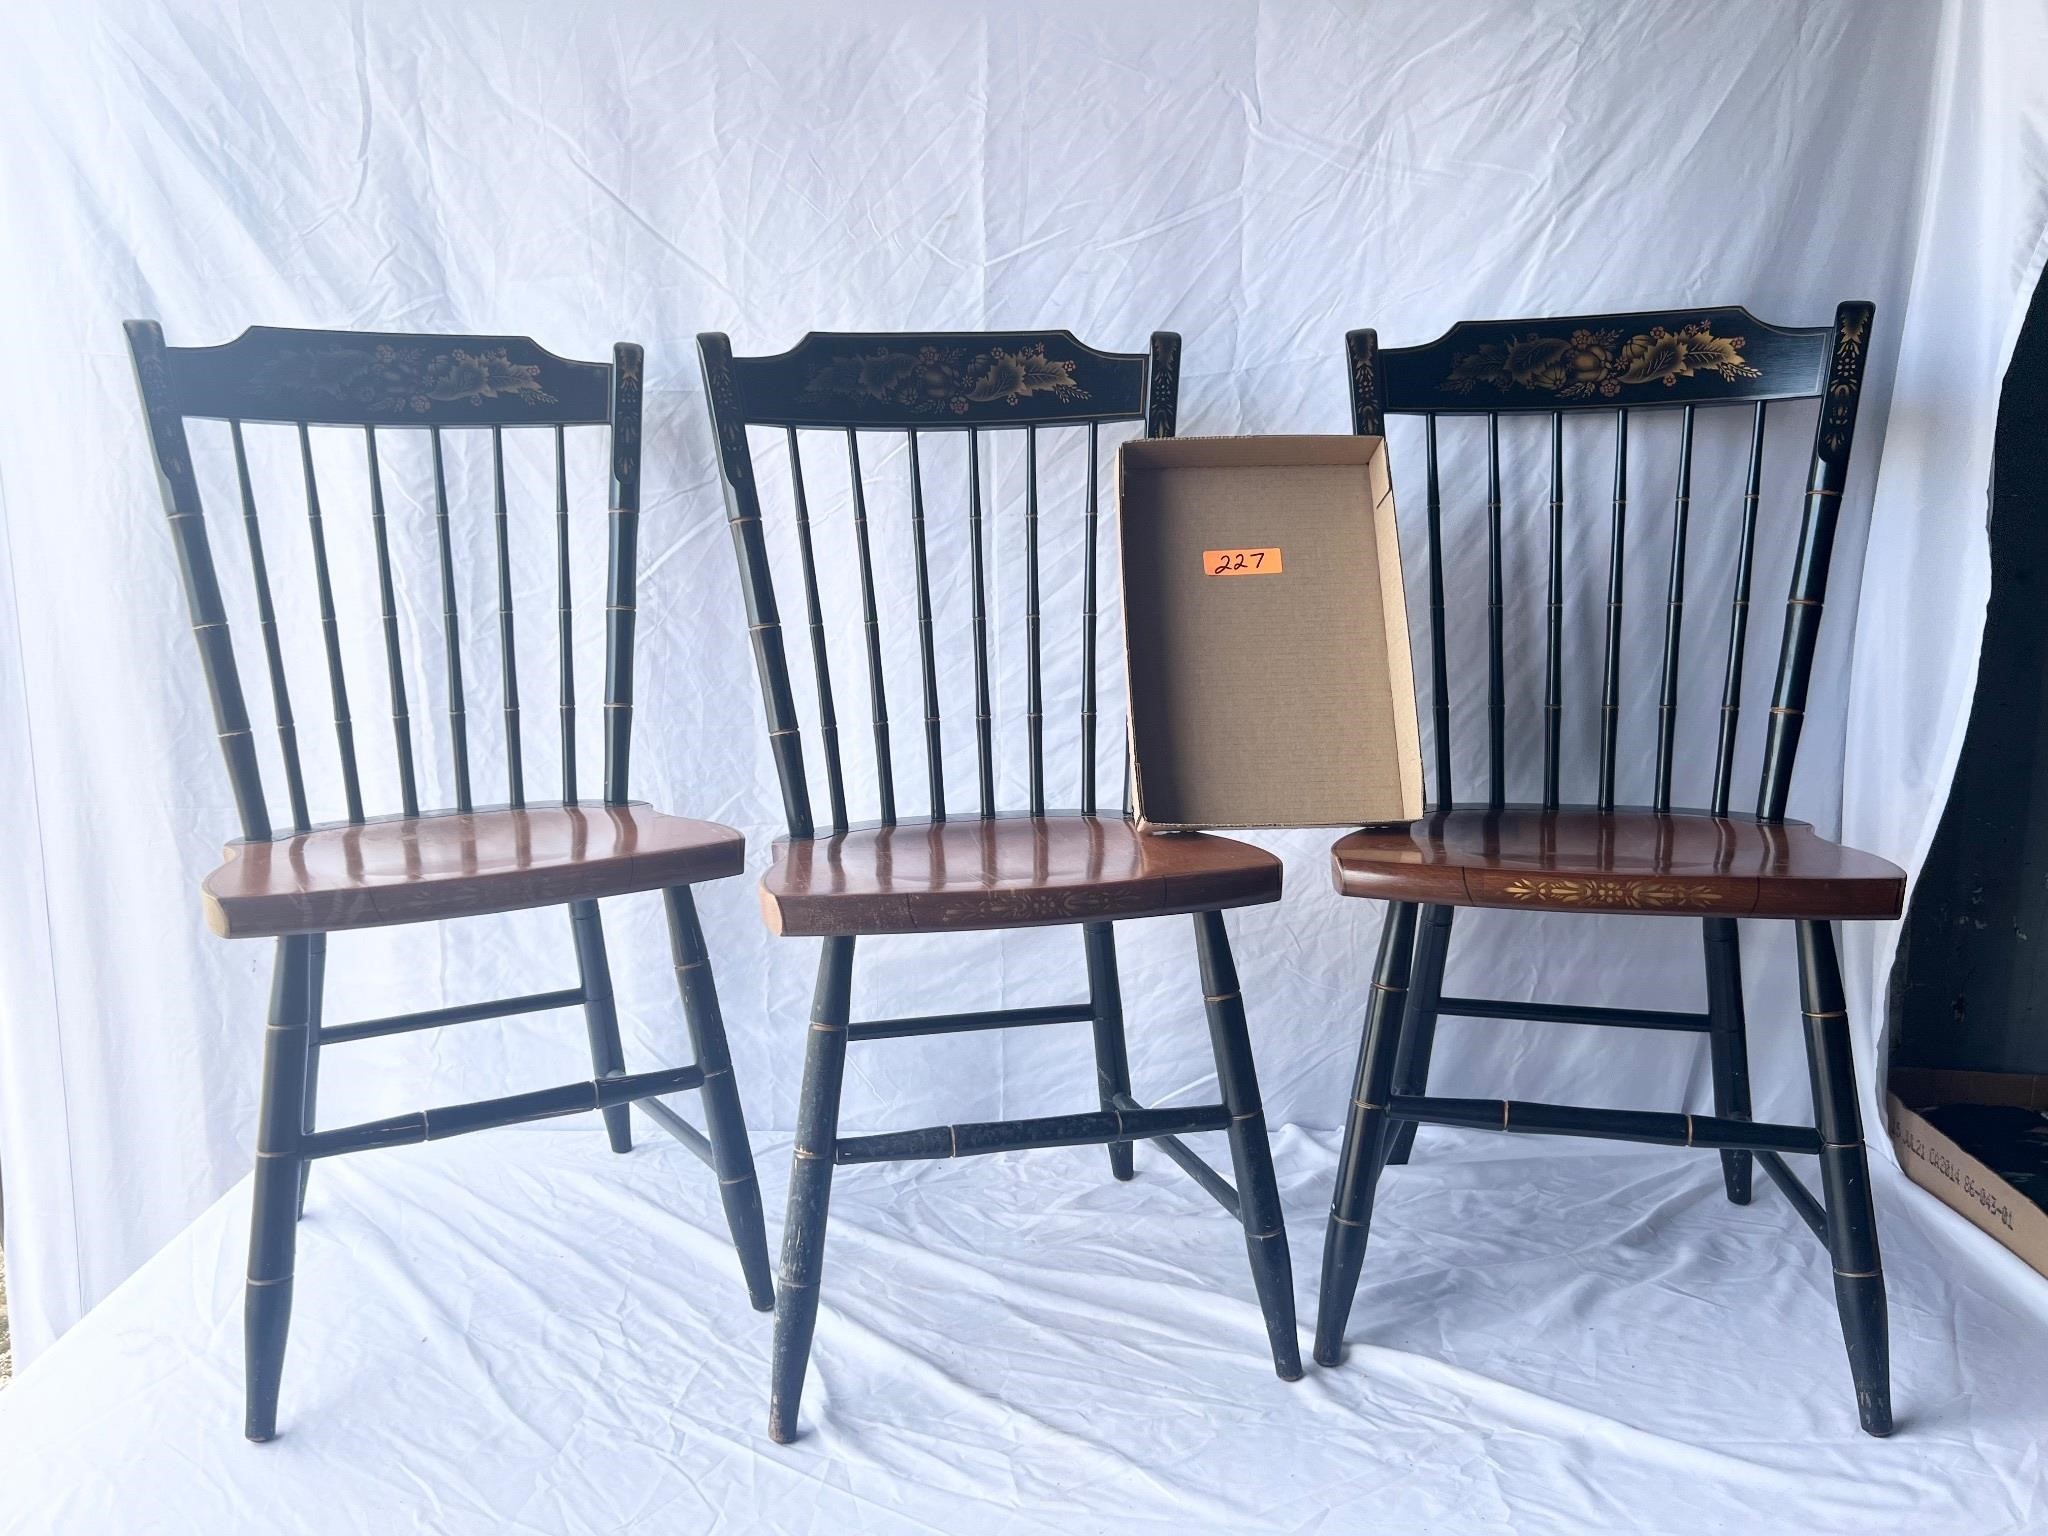 3 Hitchcock's Chairs